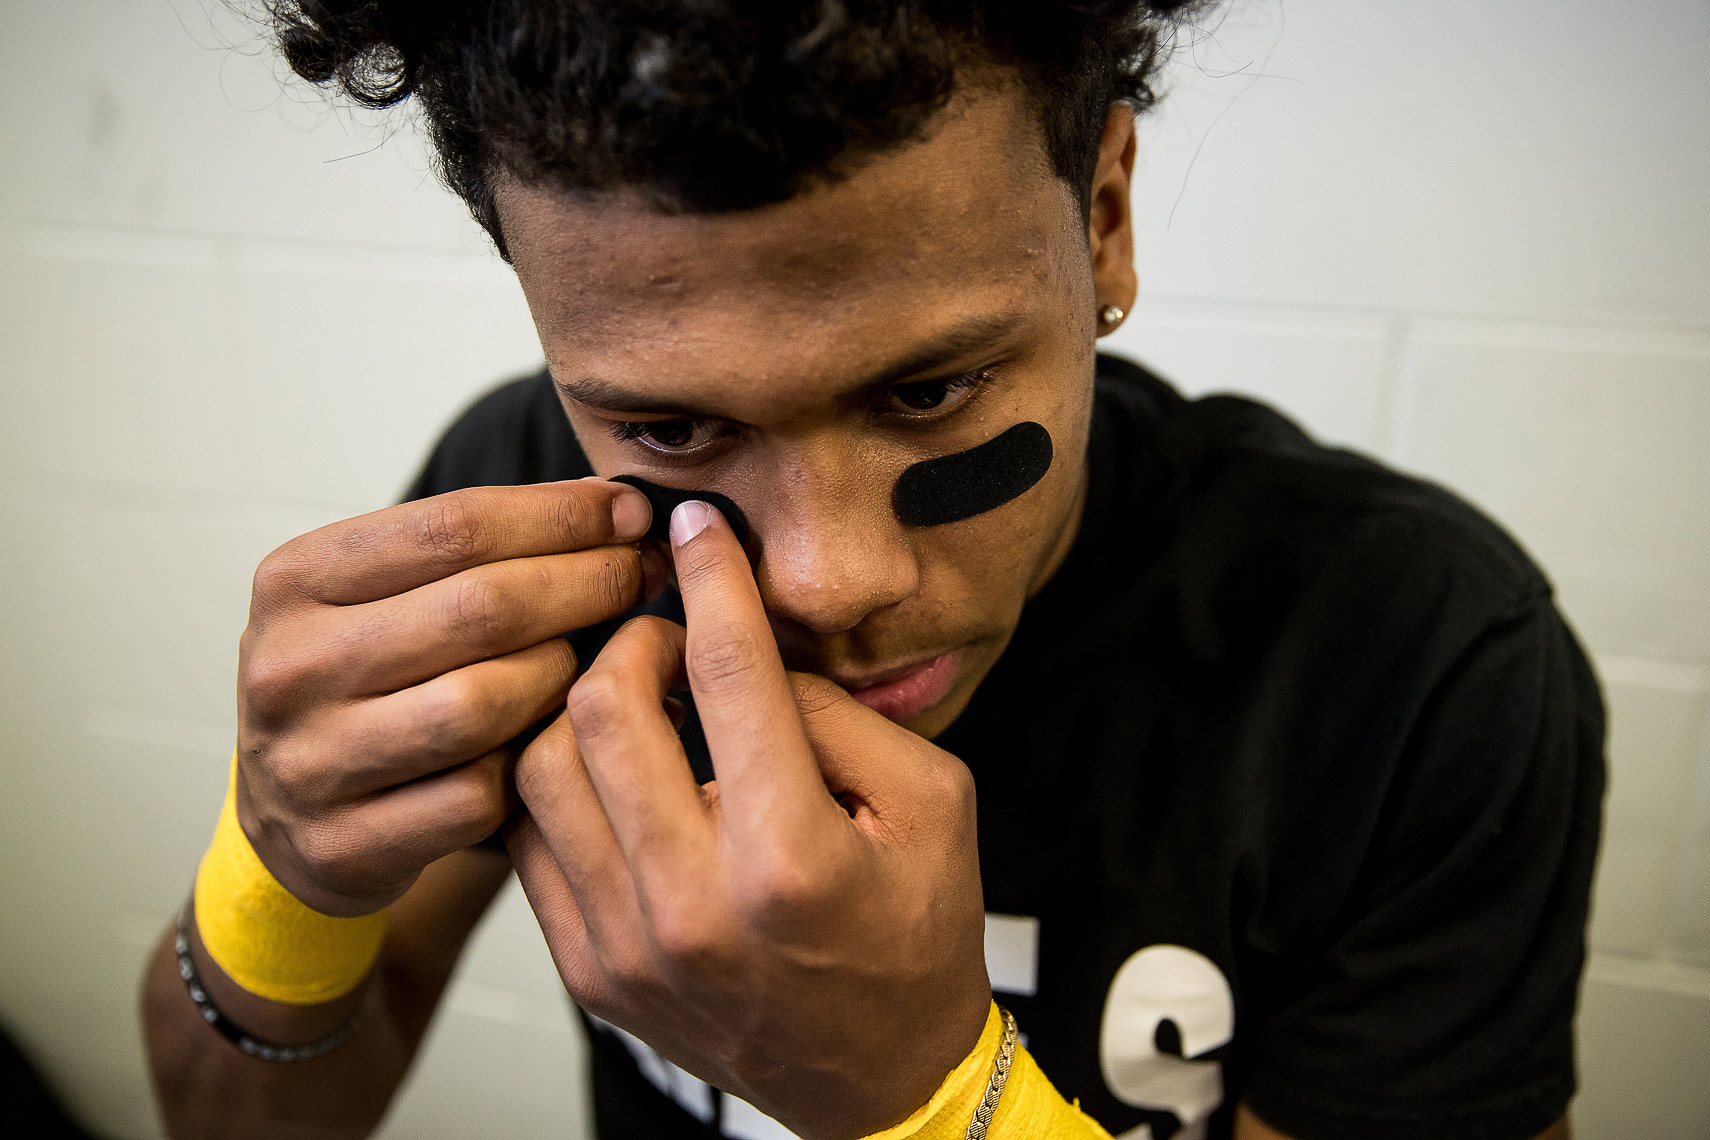 COMMERCIAL DOCUMENTARY SPORTS PHOTOGRAPHER IN BALTIMORE ST FRANCES FOOTBALL TEAM FEATURED IN HBO THE COST OF WINNING SERIES AND ESPN E60 PHOTOGRAPHY